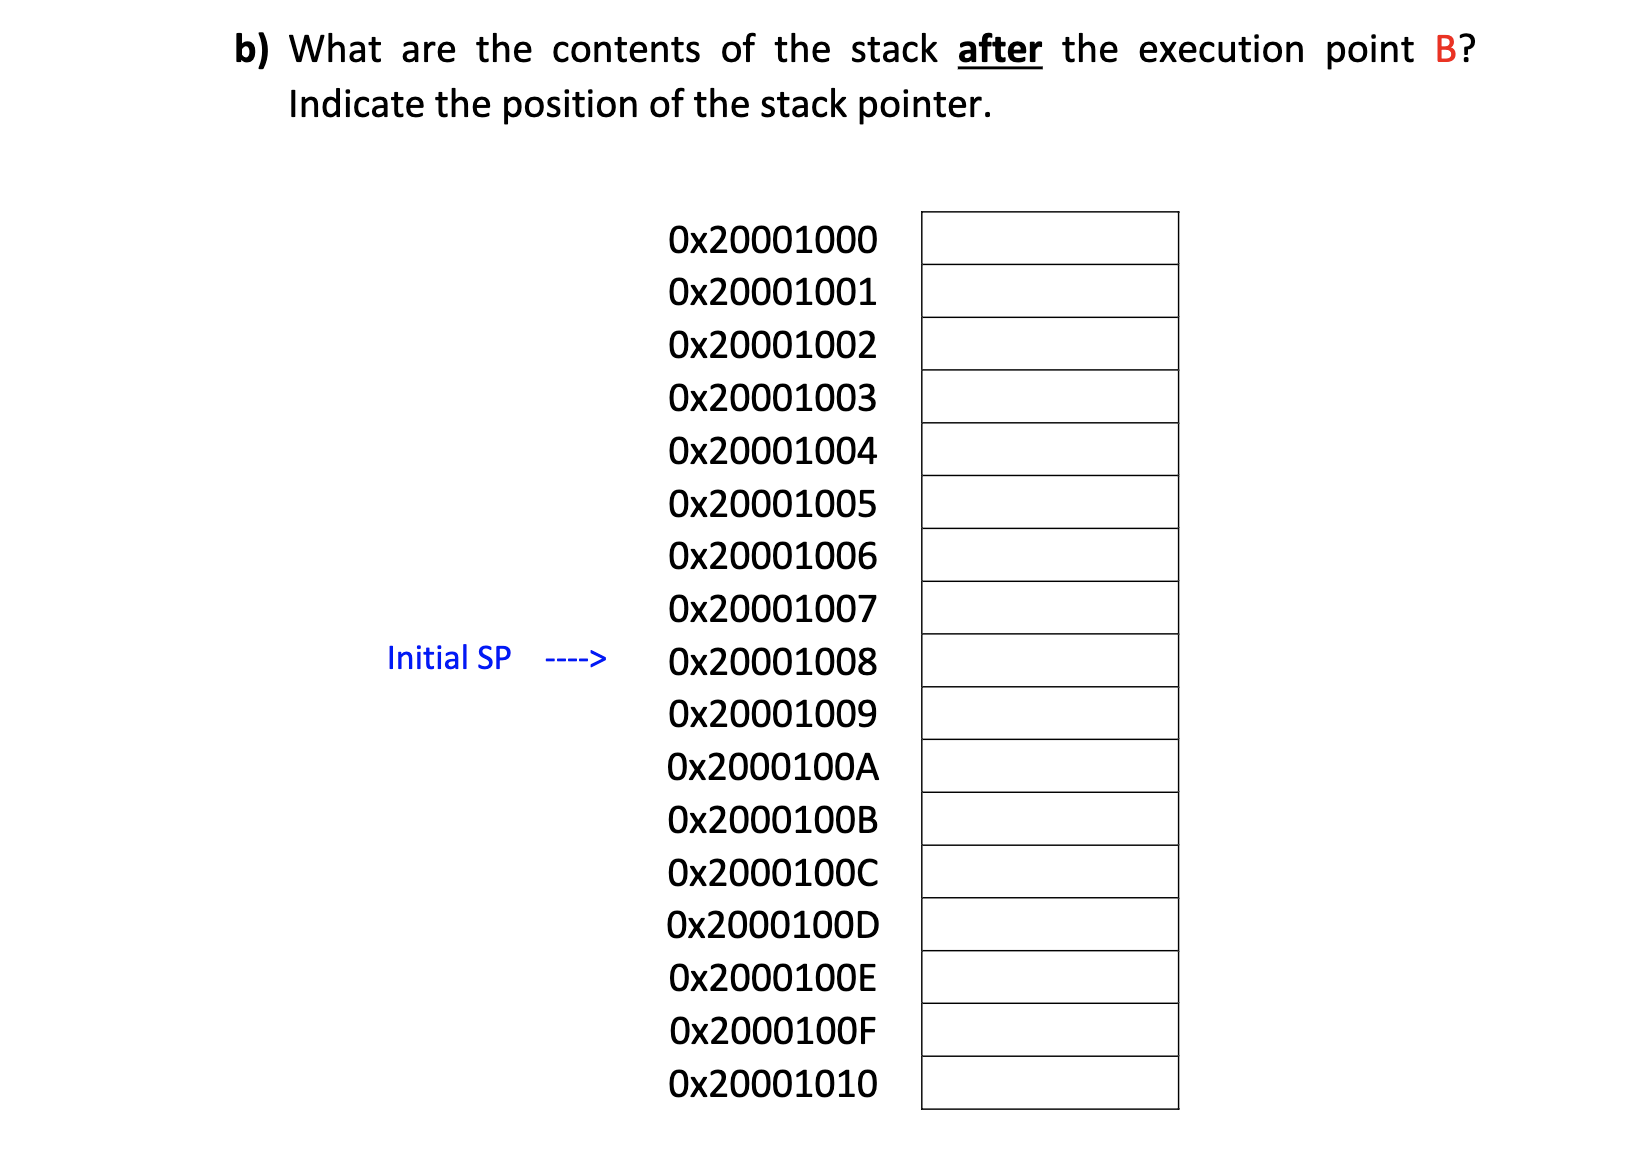 b) What are the contents of the stack after the execution point B? Indicate the position of the stack